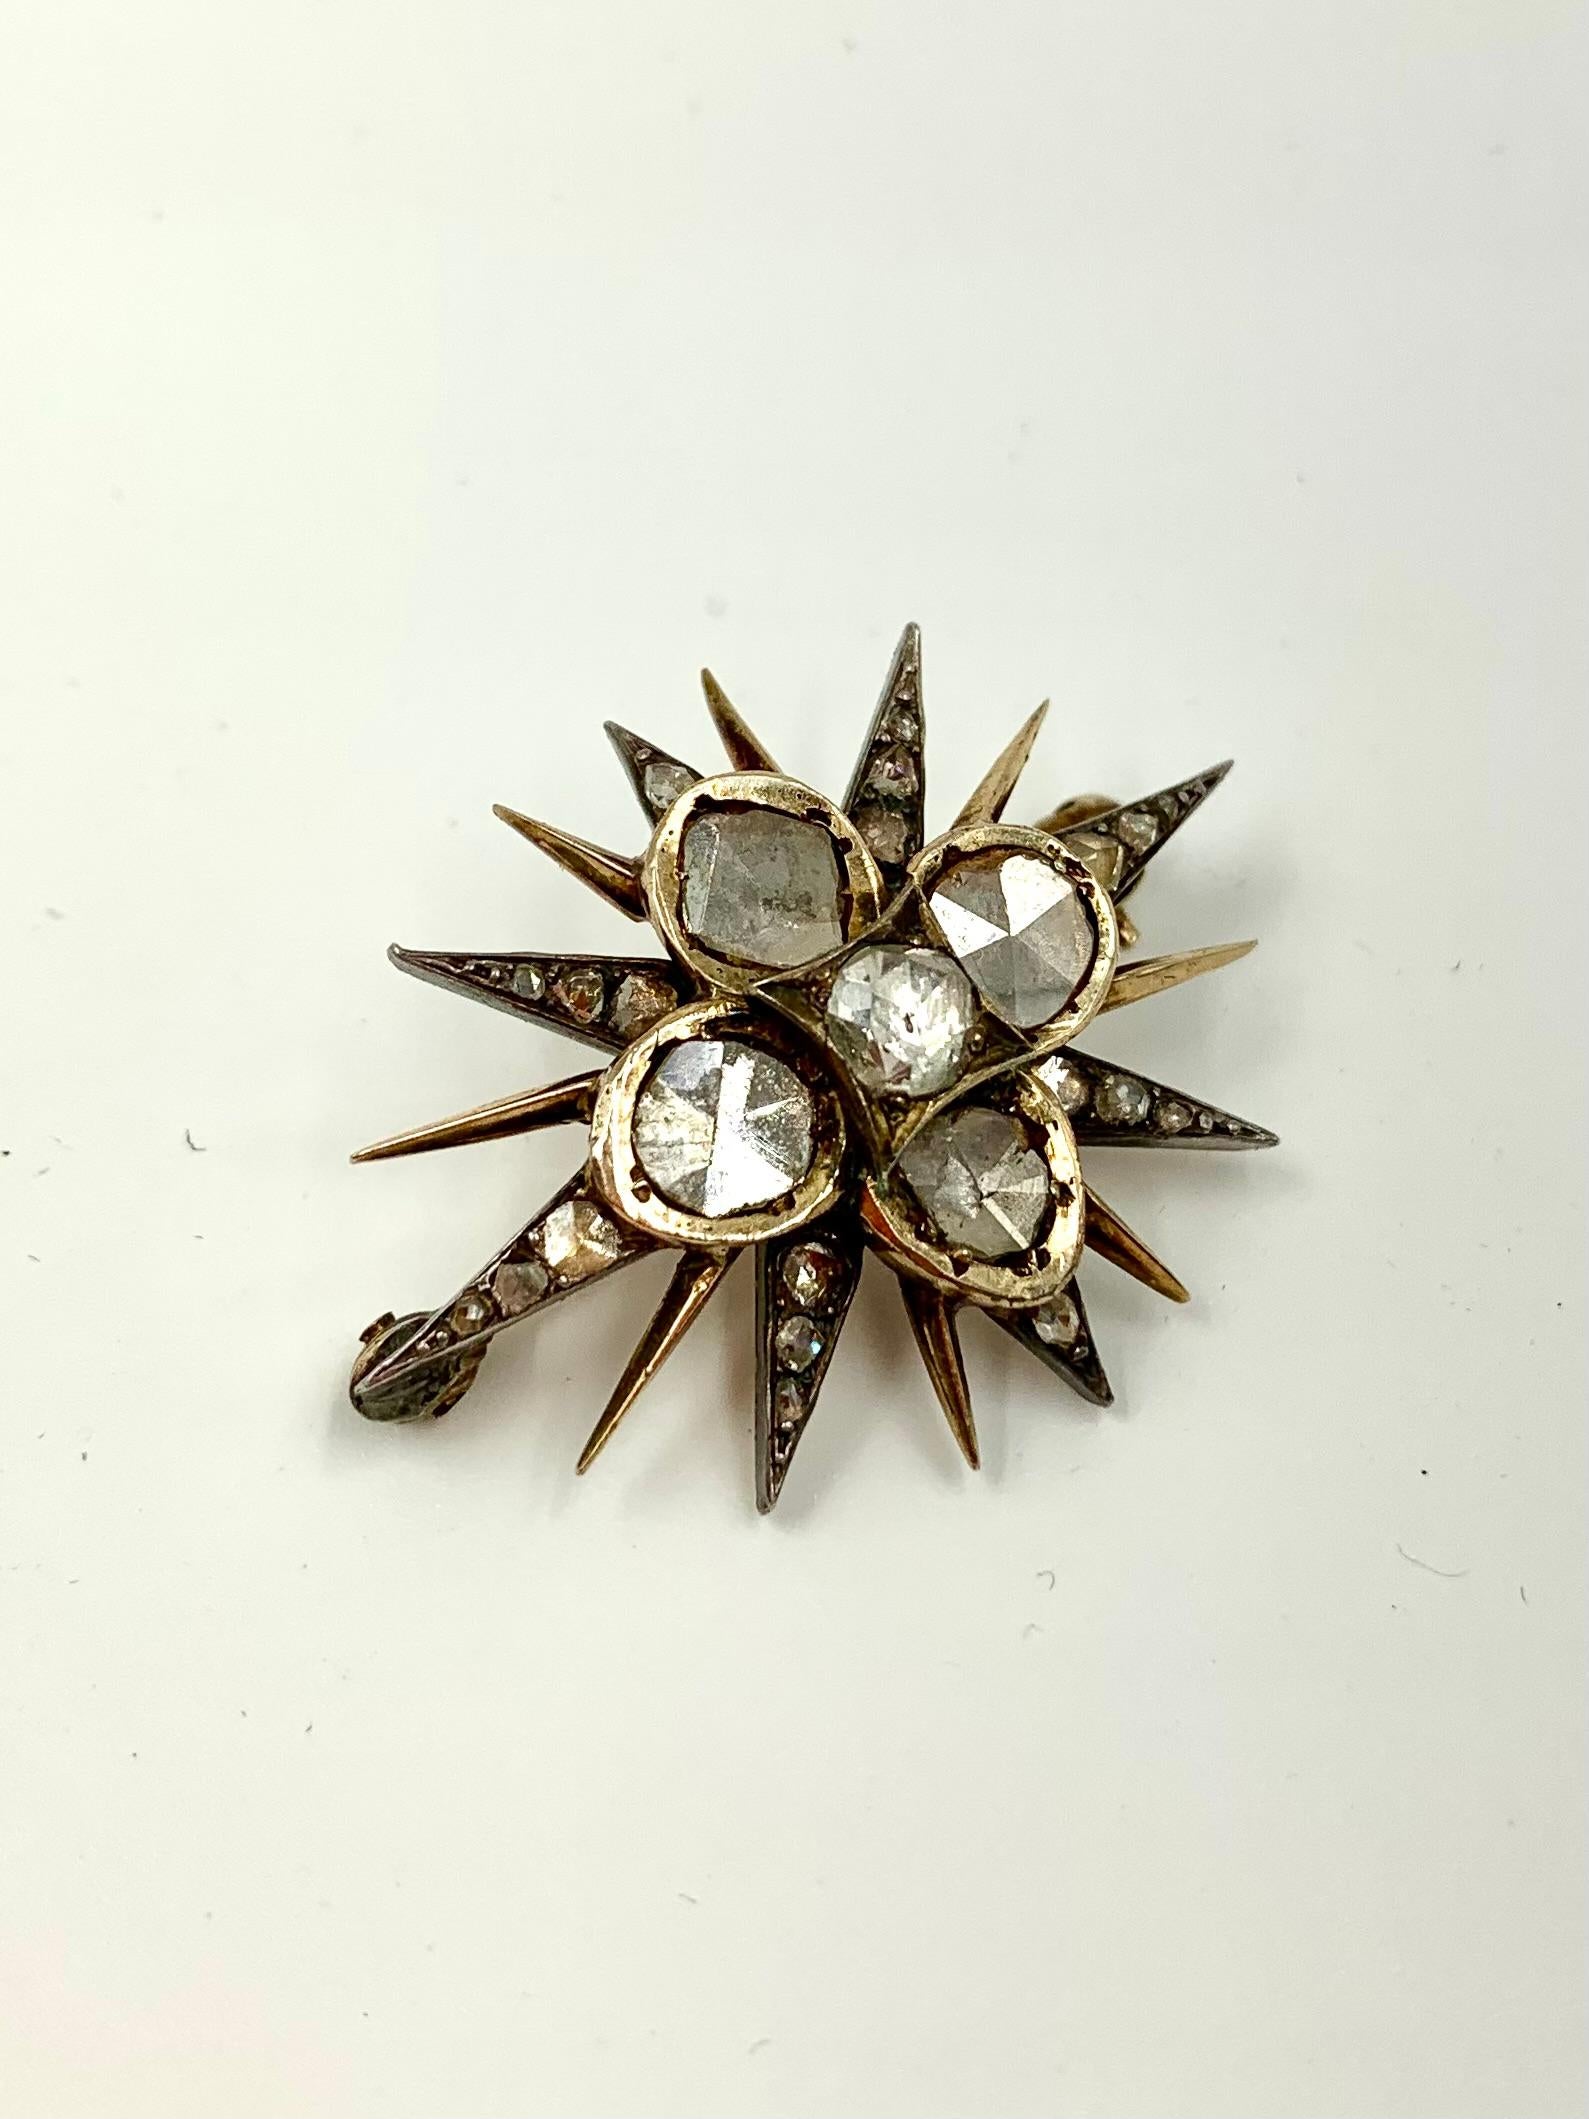 Enchanting 18th Century Georgian period diamond brooch in the shape of a star, retailed by S.J. Phillips with the firm's early heart shaped tooled leather box.
Diamonds: approximately 3 TCW- Old Mine, Rose Cut and Point Cut
Tested for 18K